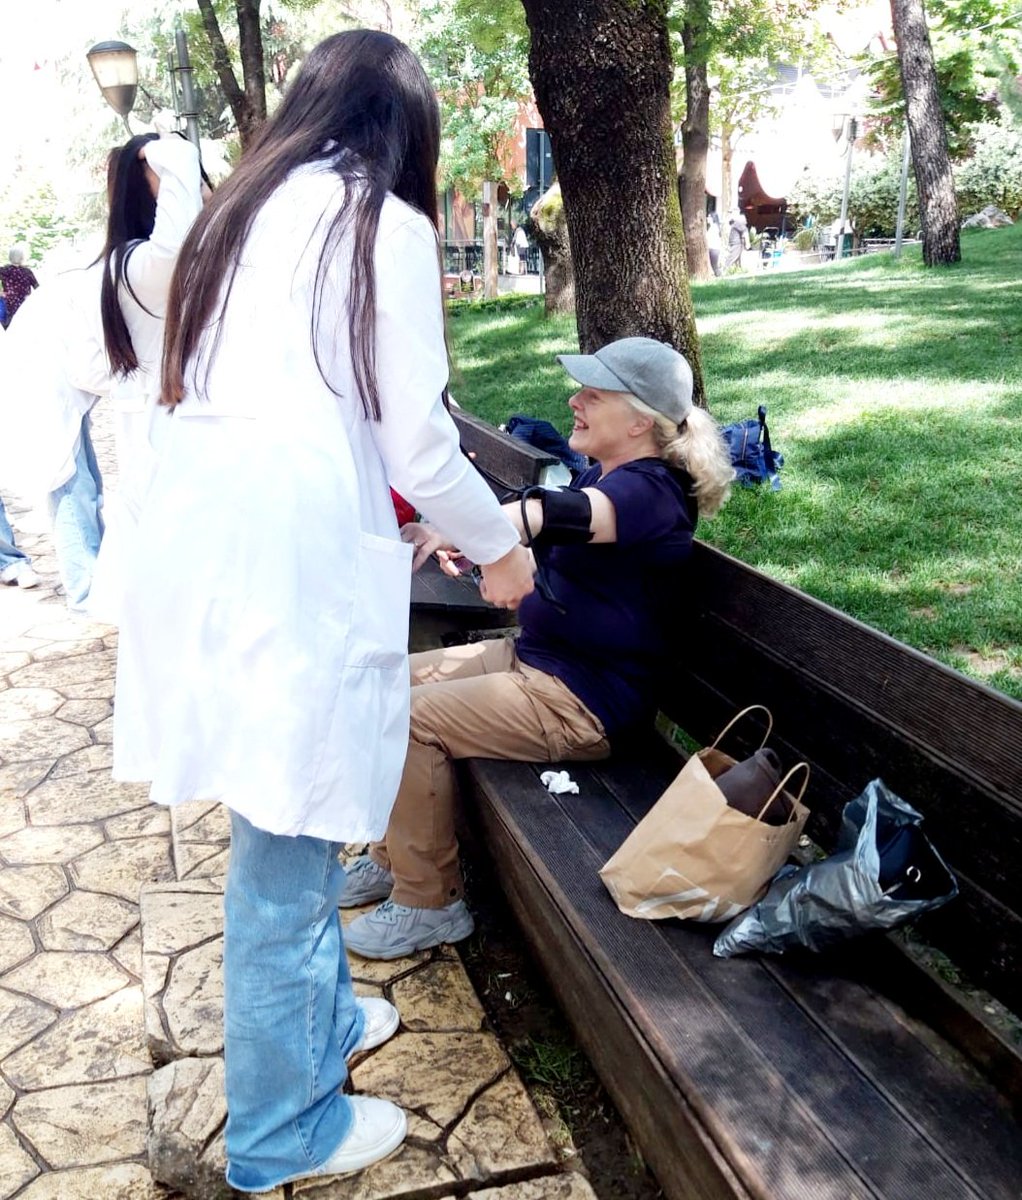 Albanian medical students looking for volunteers to practice taking blood pressure in the park today. All spoke excellent English so took the opportunity to do a bit of HIV education through sharing my positive status and the #UequalsU message.